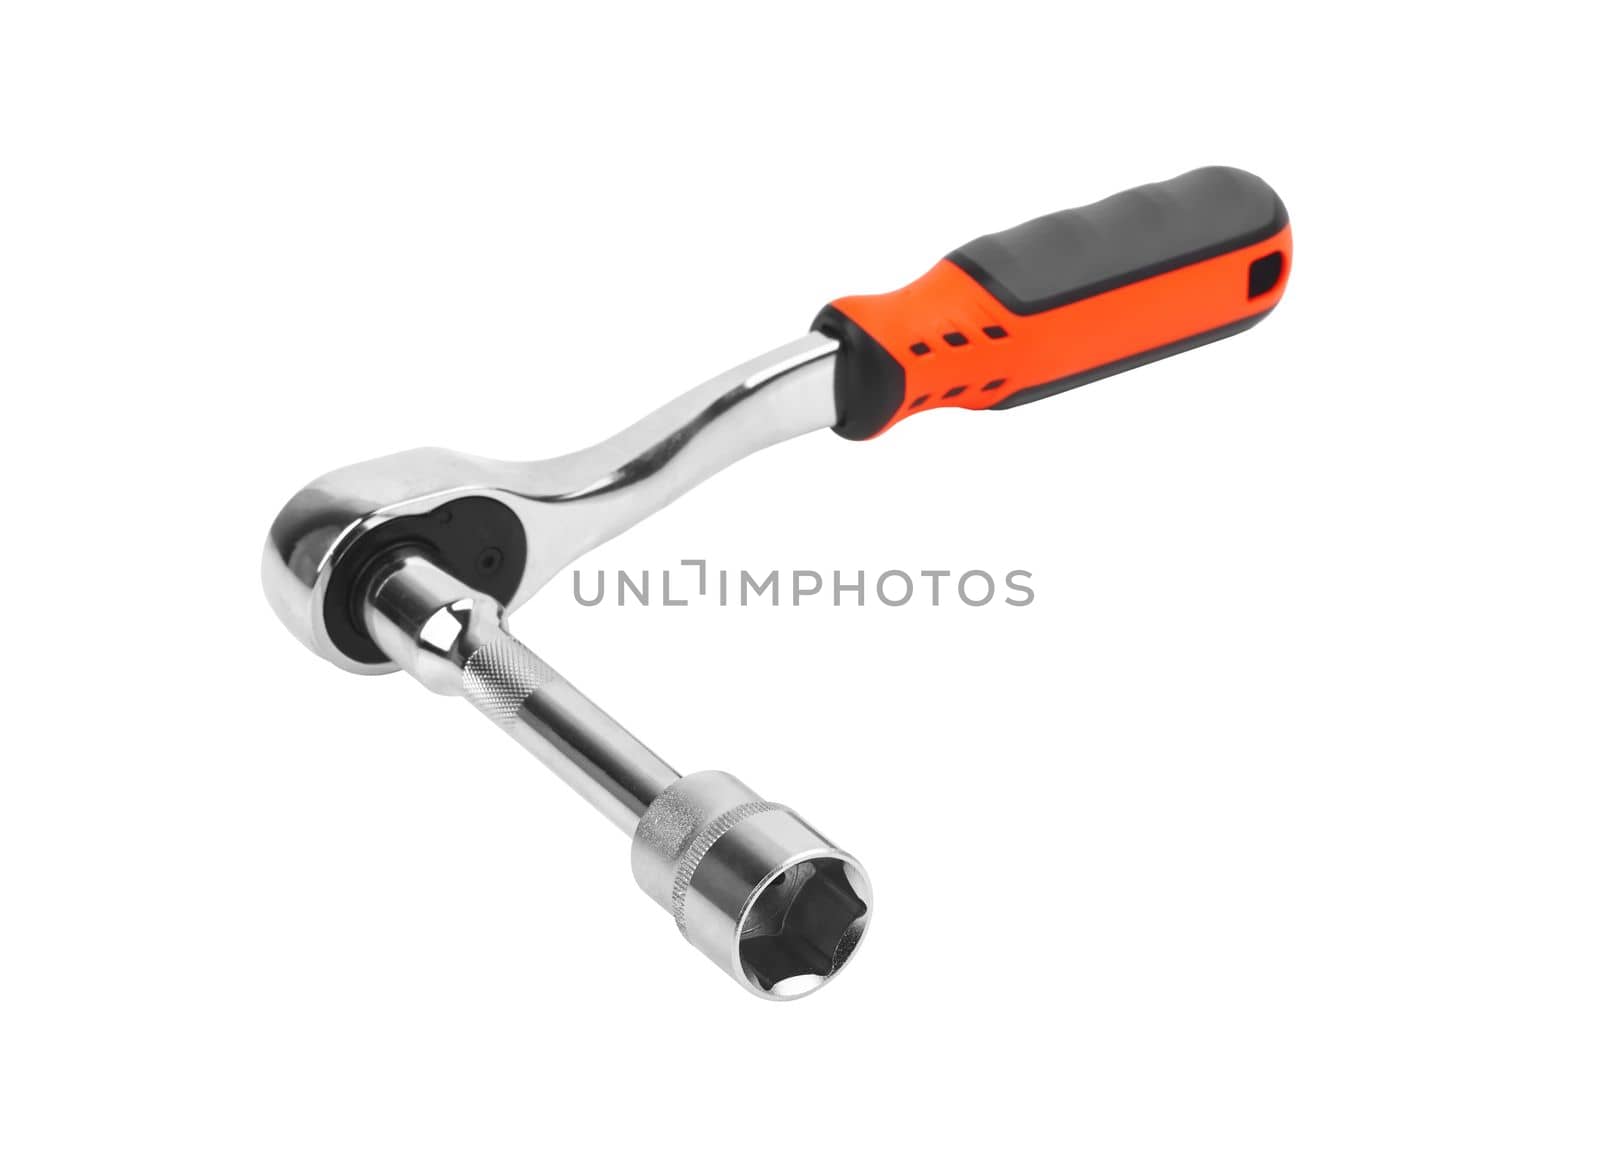 Wrench with ratchet isolated on white background